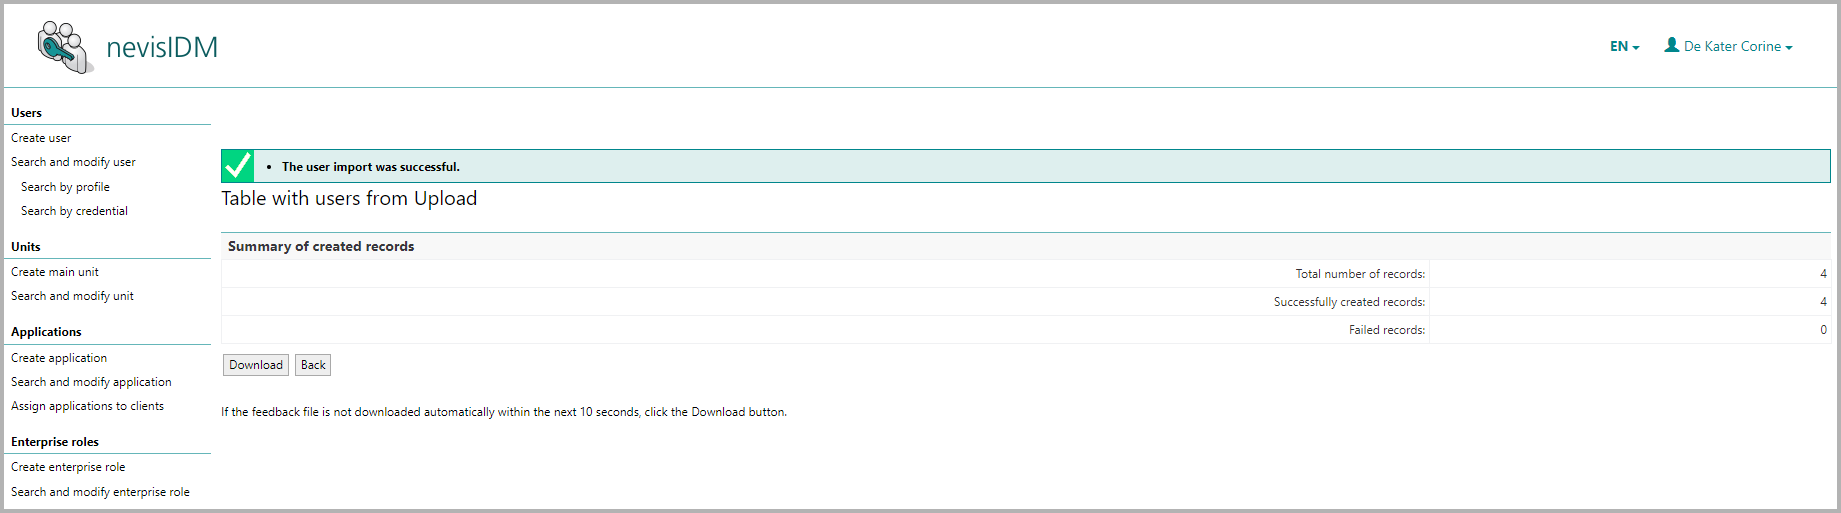 Confirmation view after the user creation